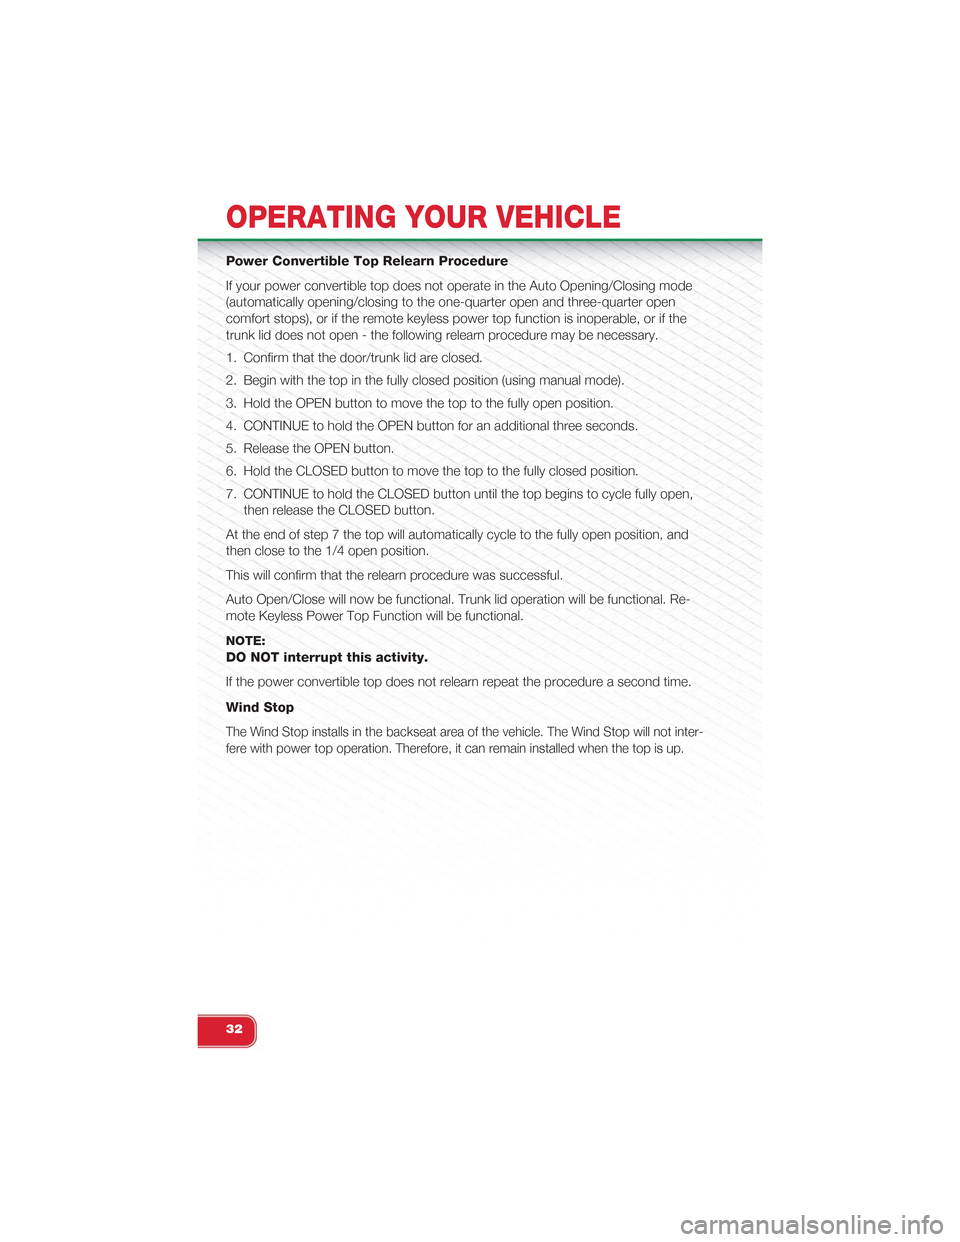 FIAT 500 ABARTH 2014 2.G User Guide Power Convertible Top Relearn Procedure
If your power convertible top does not operate in the Auto Opening/Closing mode
(automatically opening/closing to the one-quarter open and three-quarter open
co